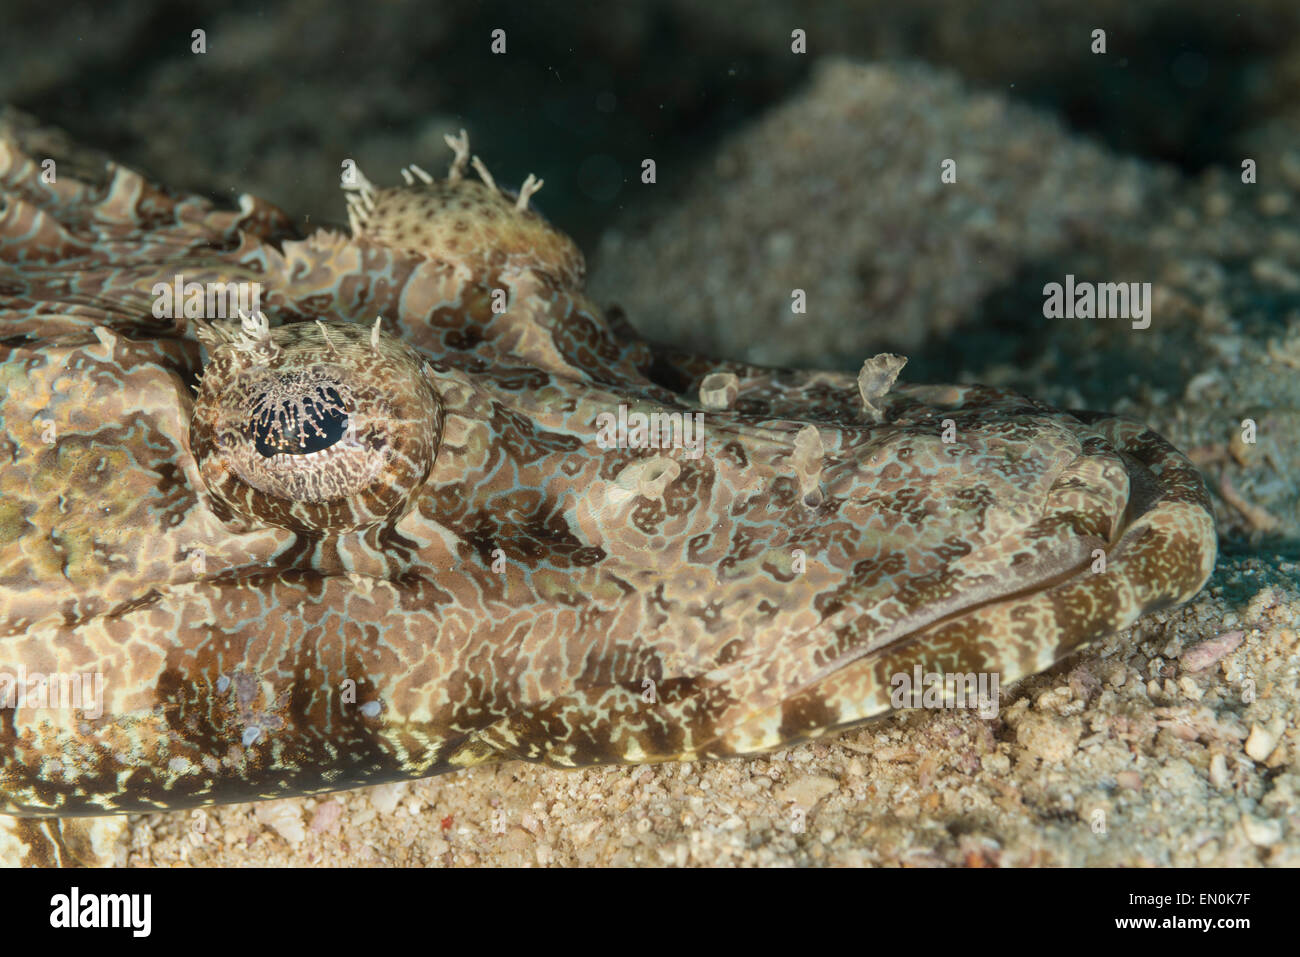 Crocodile fish camouflaged in its environment Stock Photo